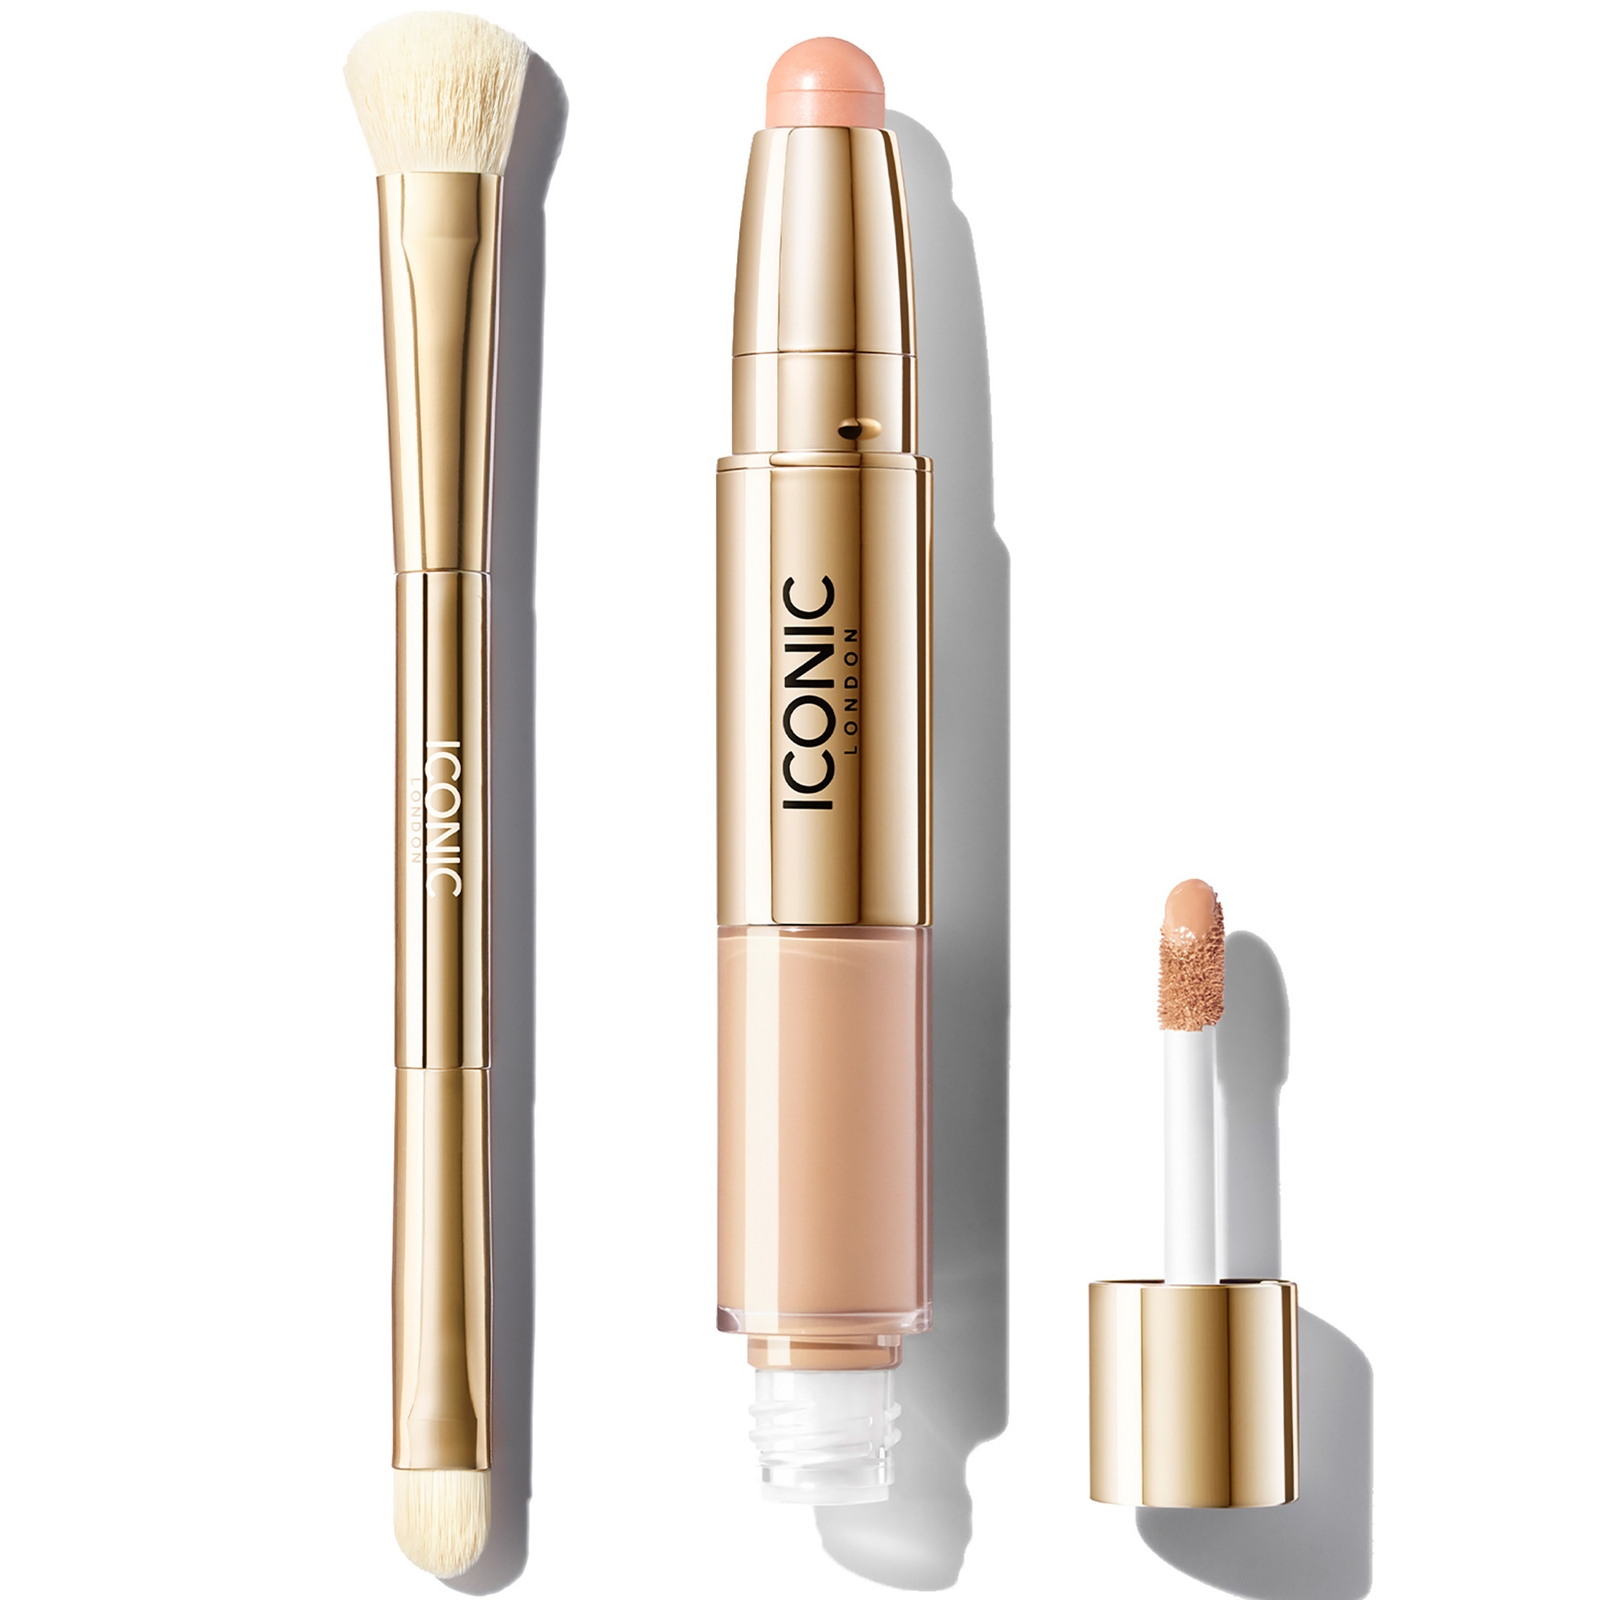 Iconic London Radiant Concealer And Brush Bundle (various Shades) - Warm Fair